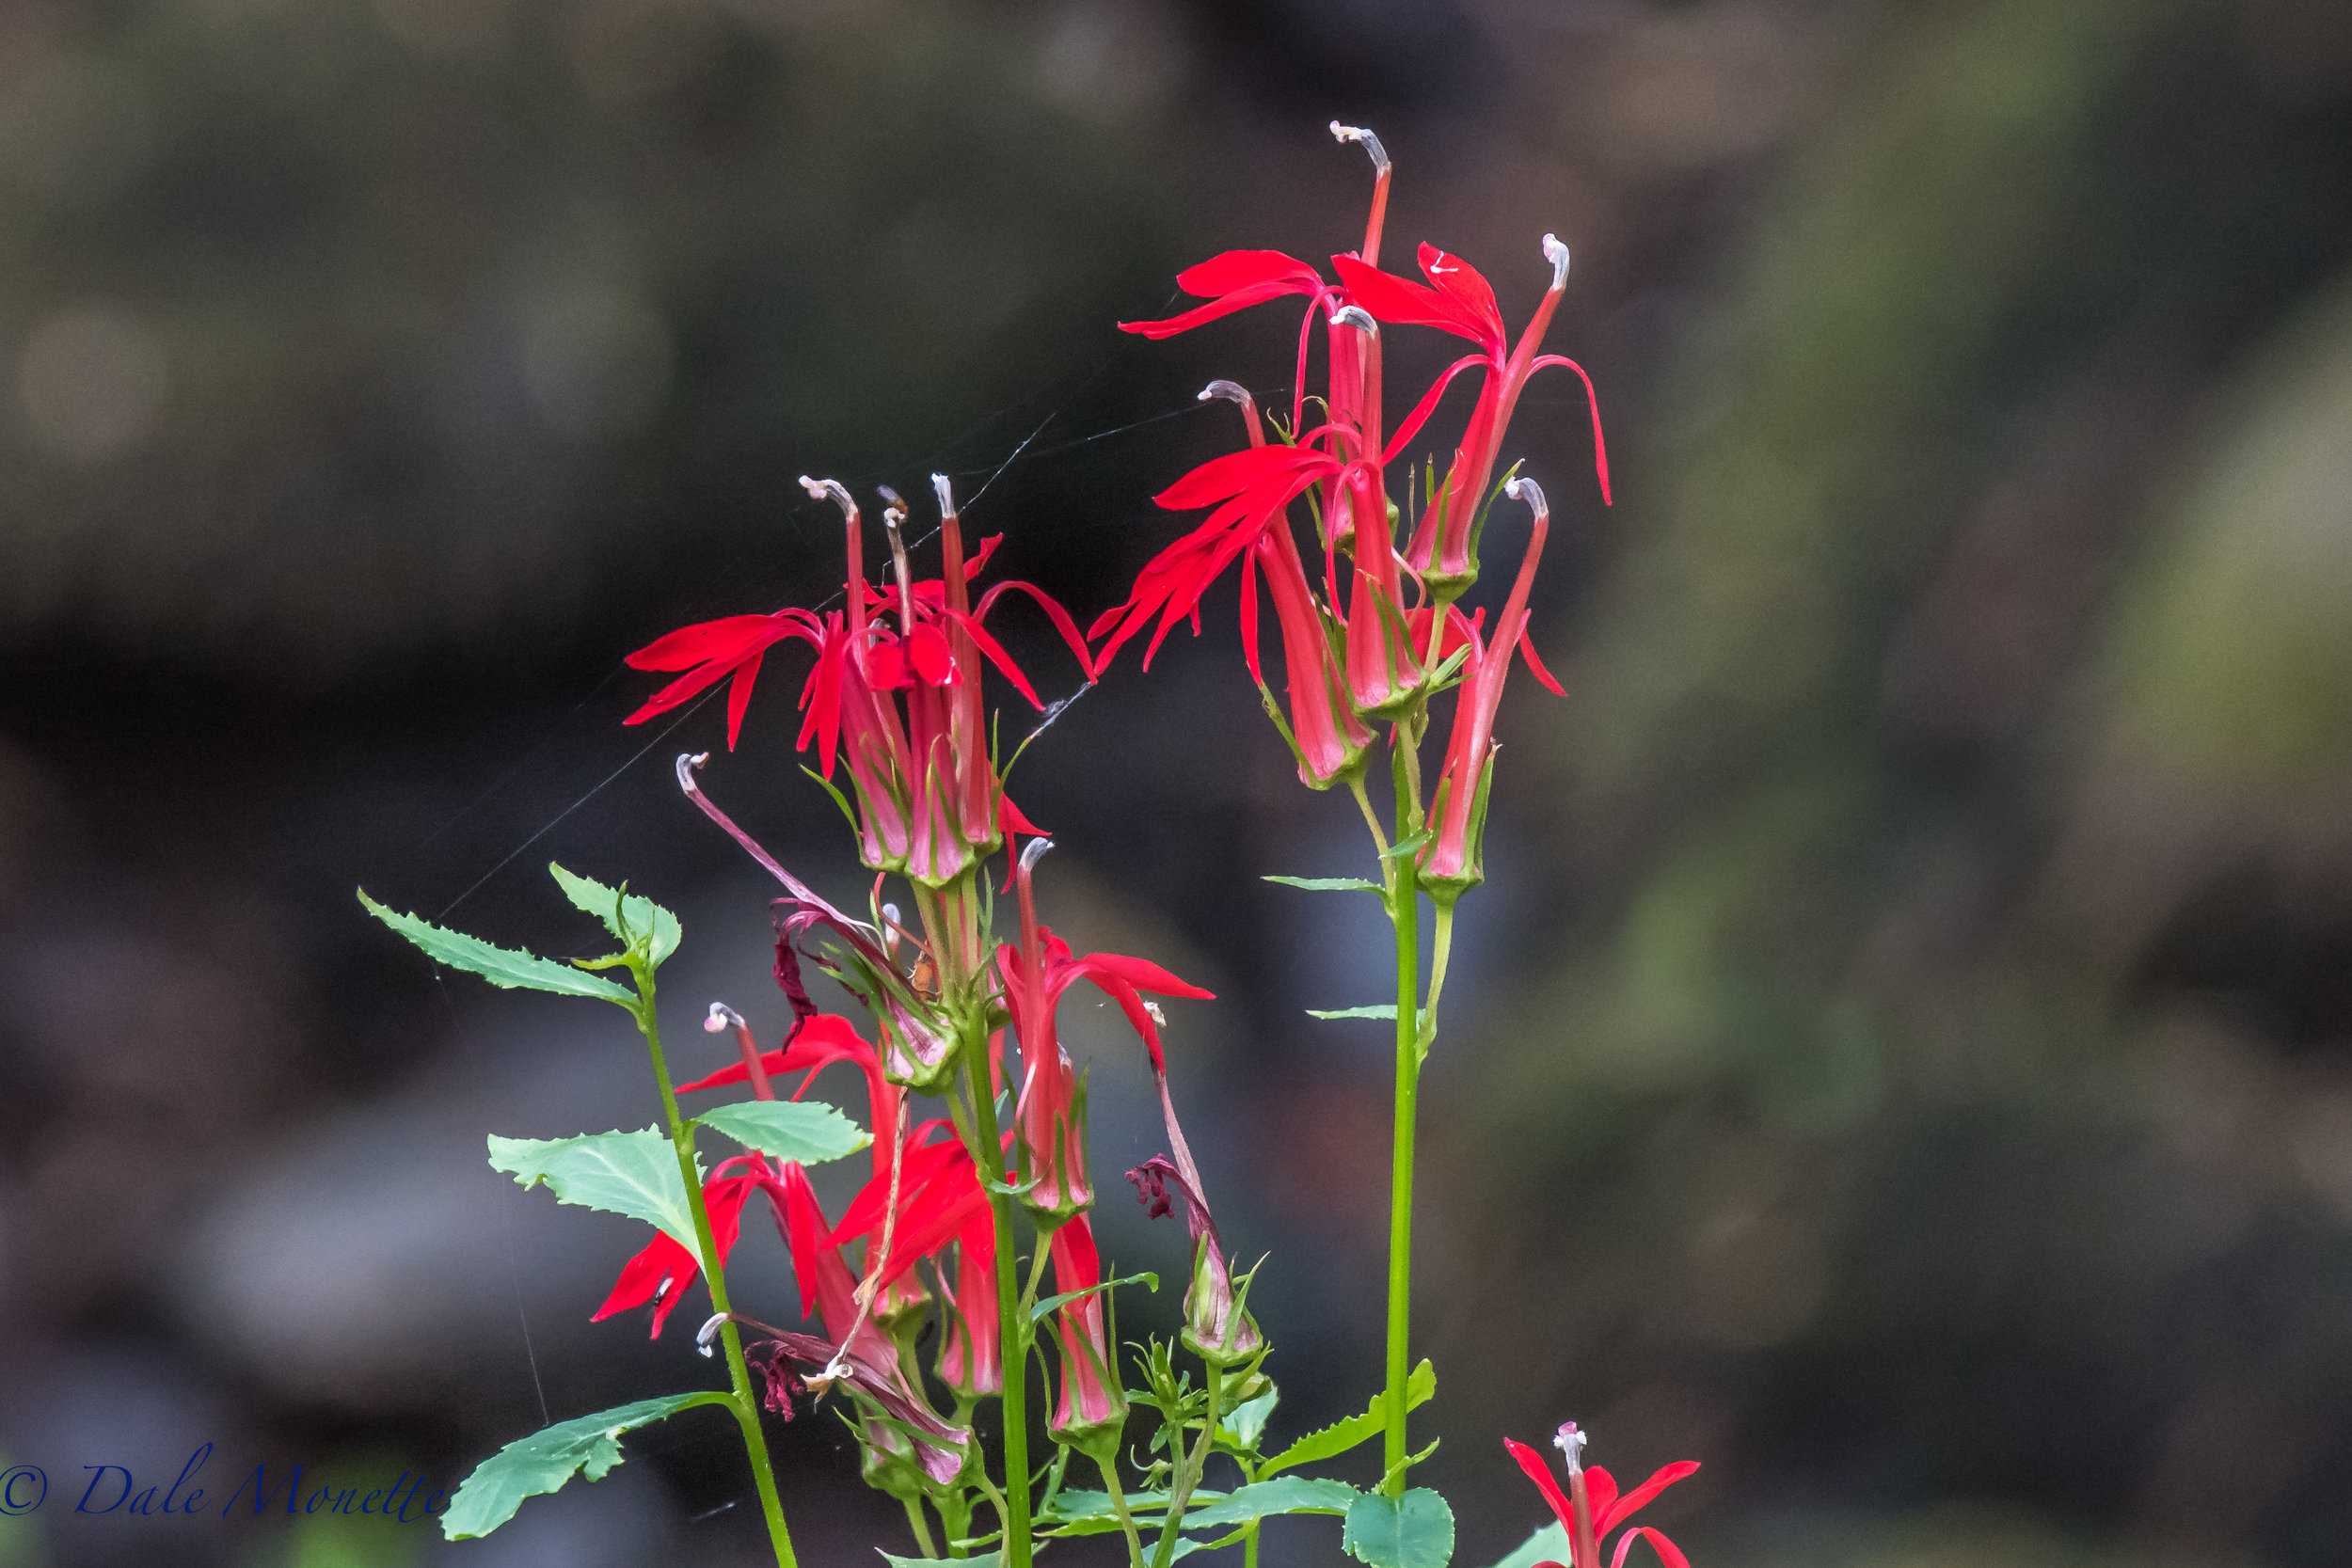   Cardinal flowers in a drying out stream bed at Quabbin &nbsp;9/5/16  